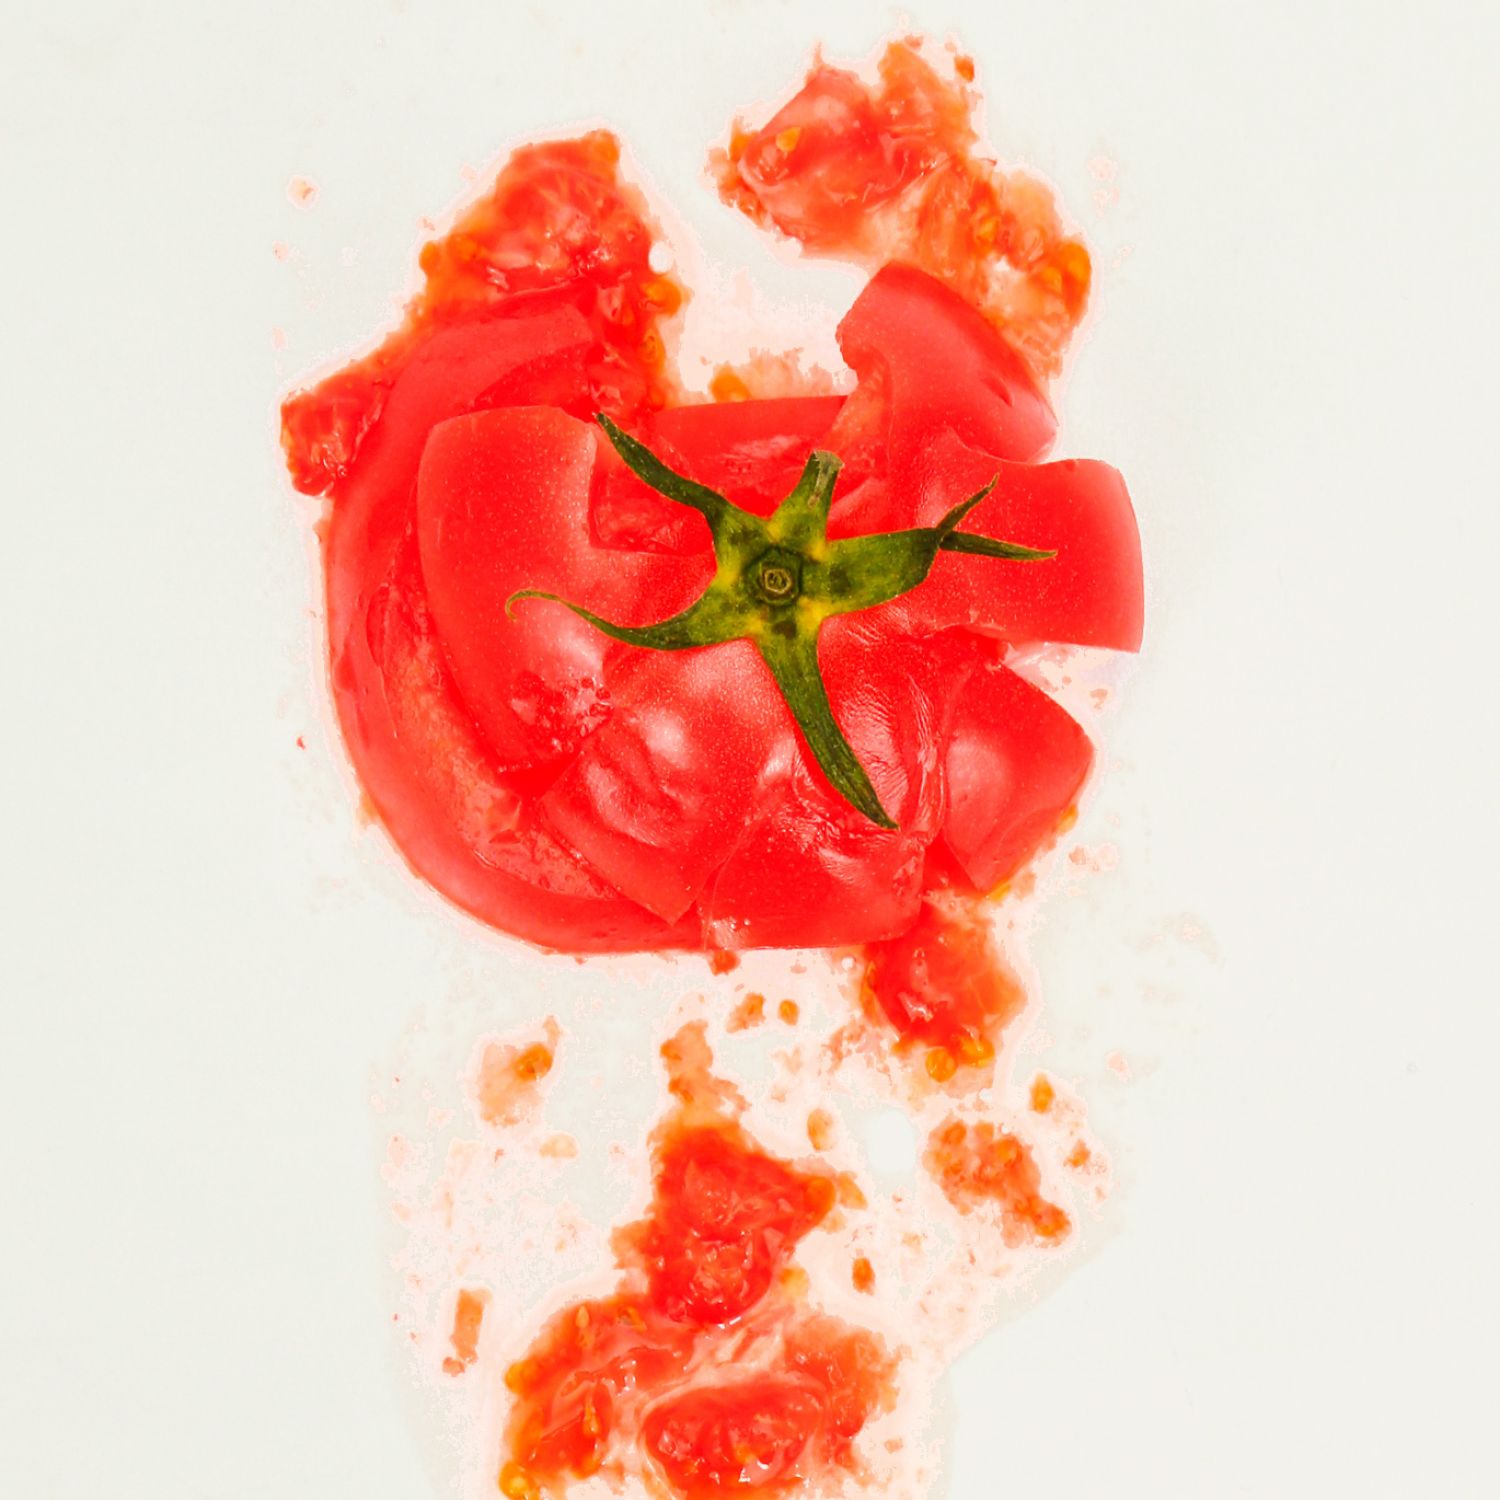 Tomato splatted against a kitchen wall